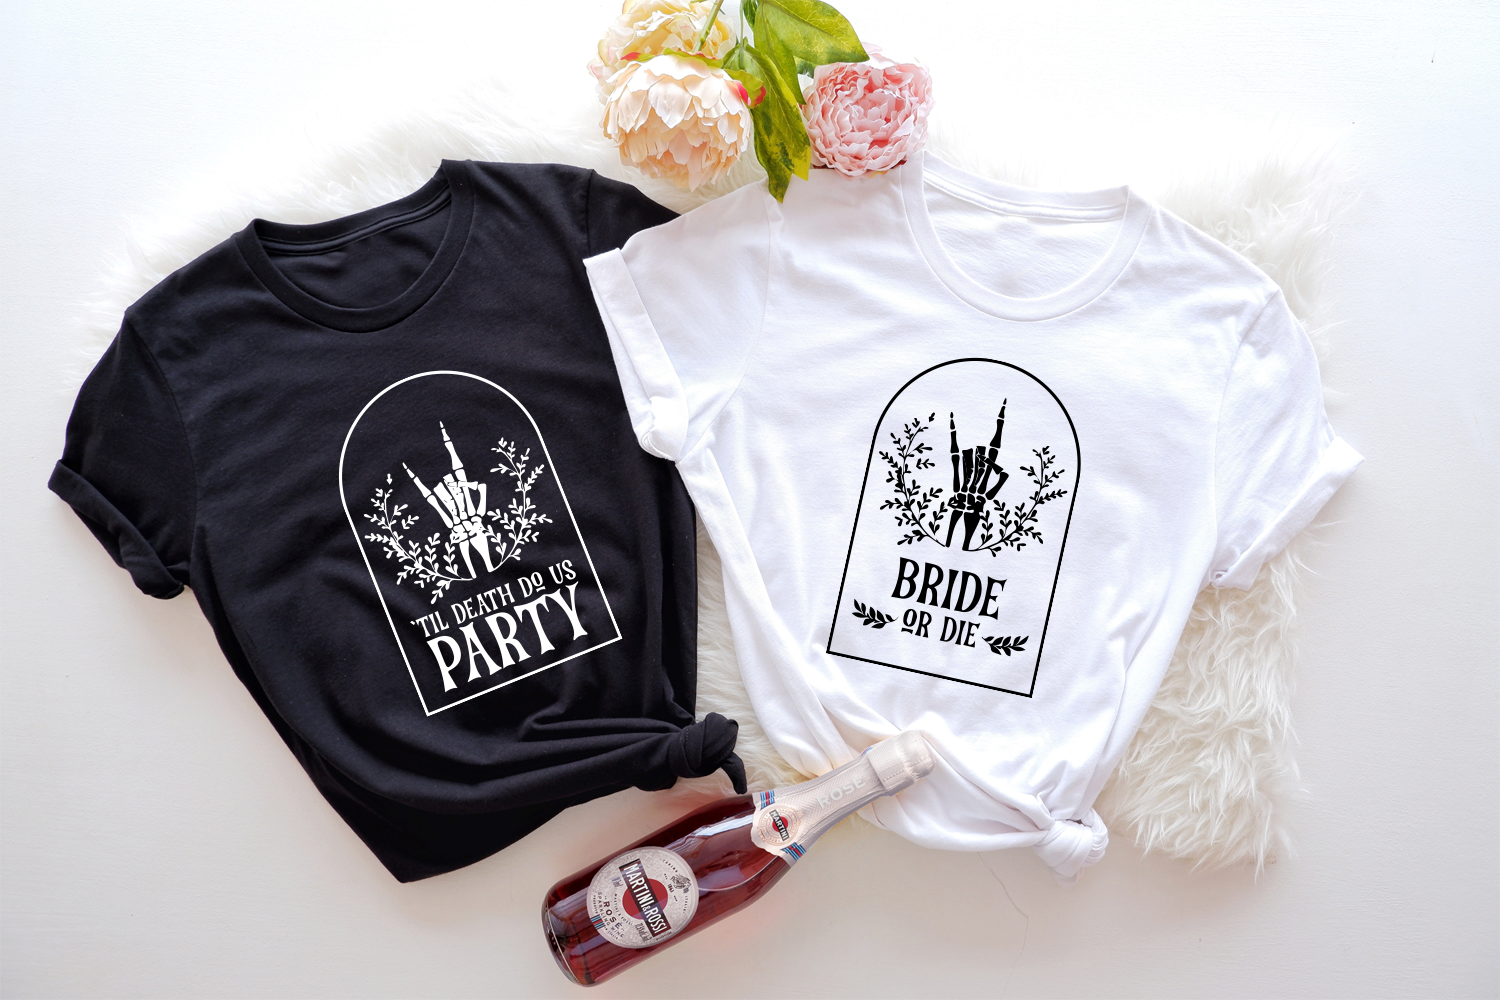 Add a touch of humor and lightheartedness to your bachelorette celebration with our collection of funny and hilarious "Bridesmaid" shirts. 